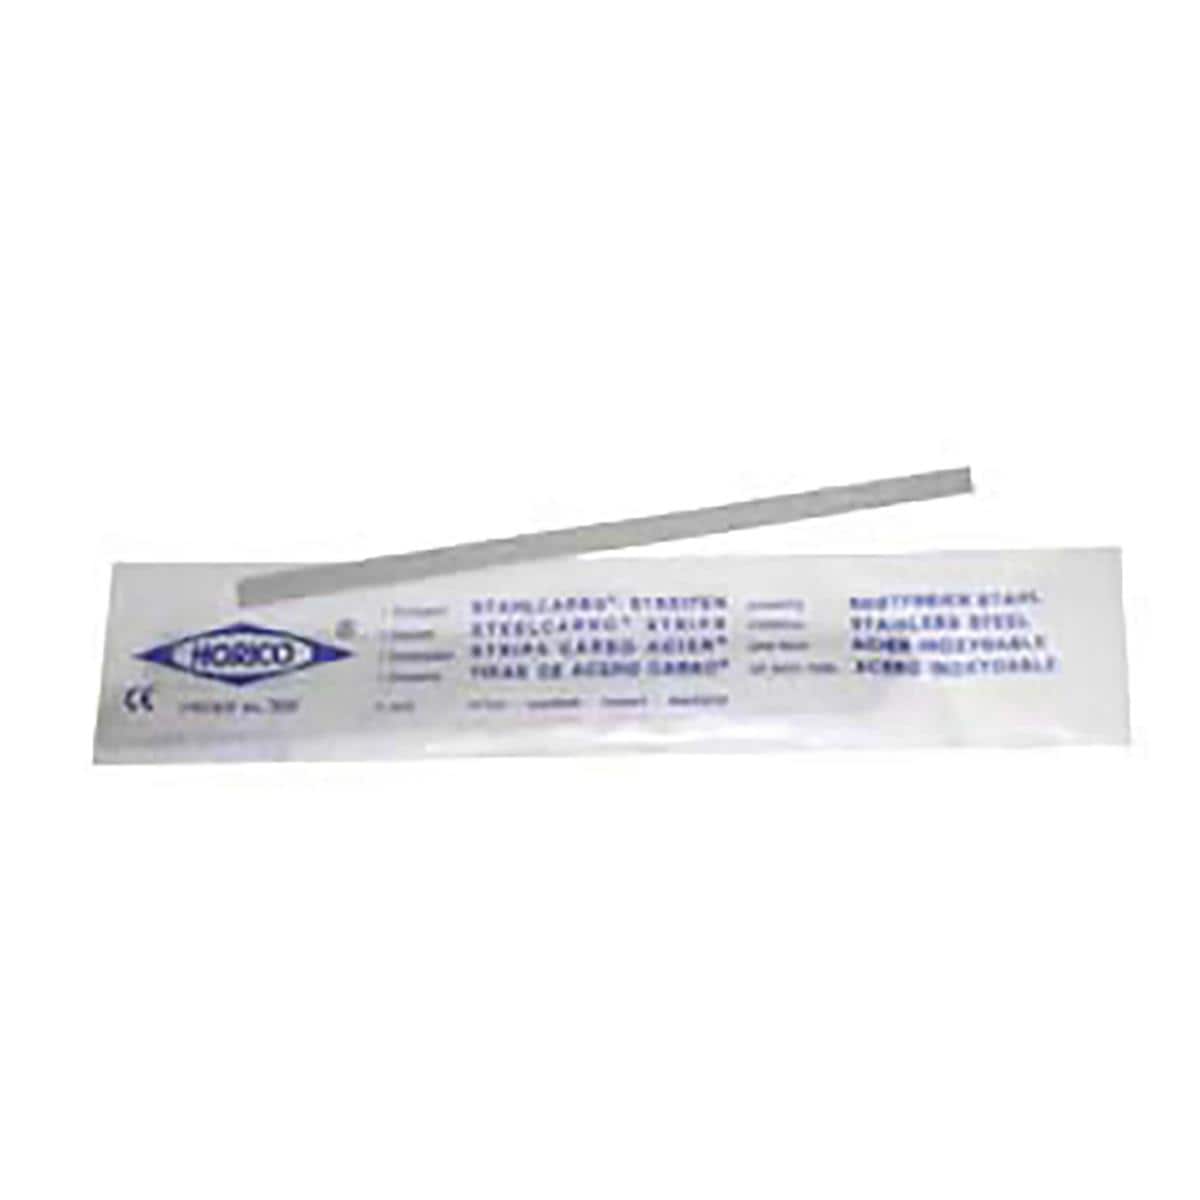 Steelcarbo Separating Strip 306 Single-Sided 12pk